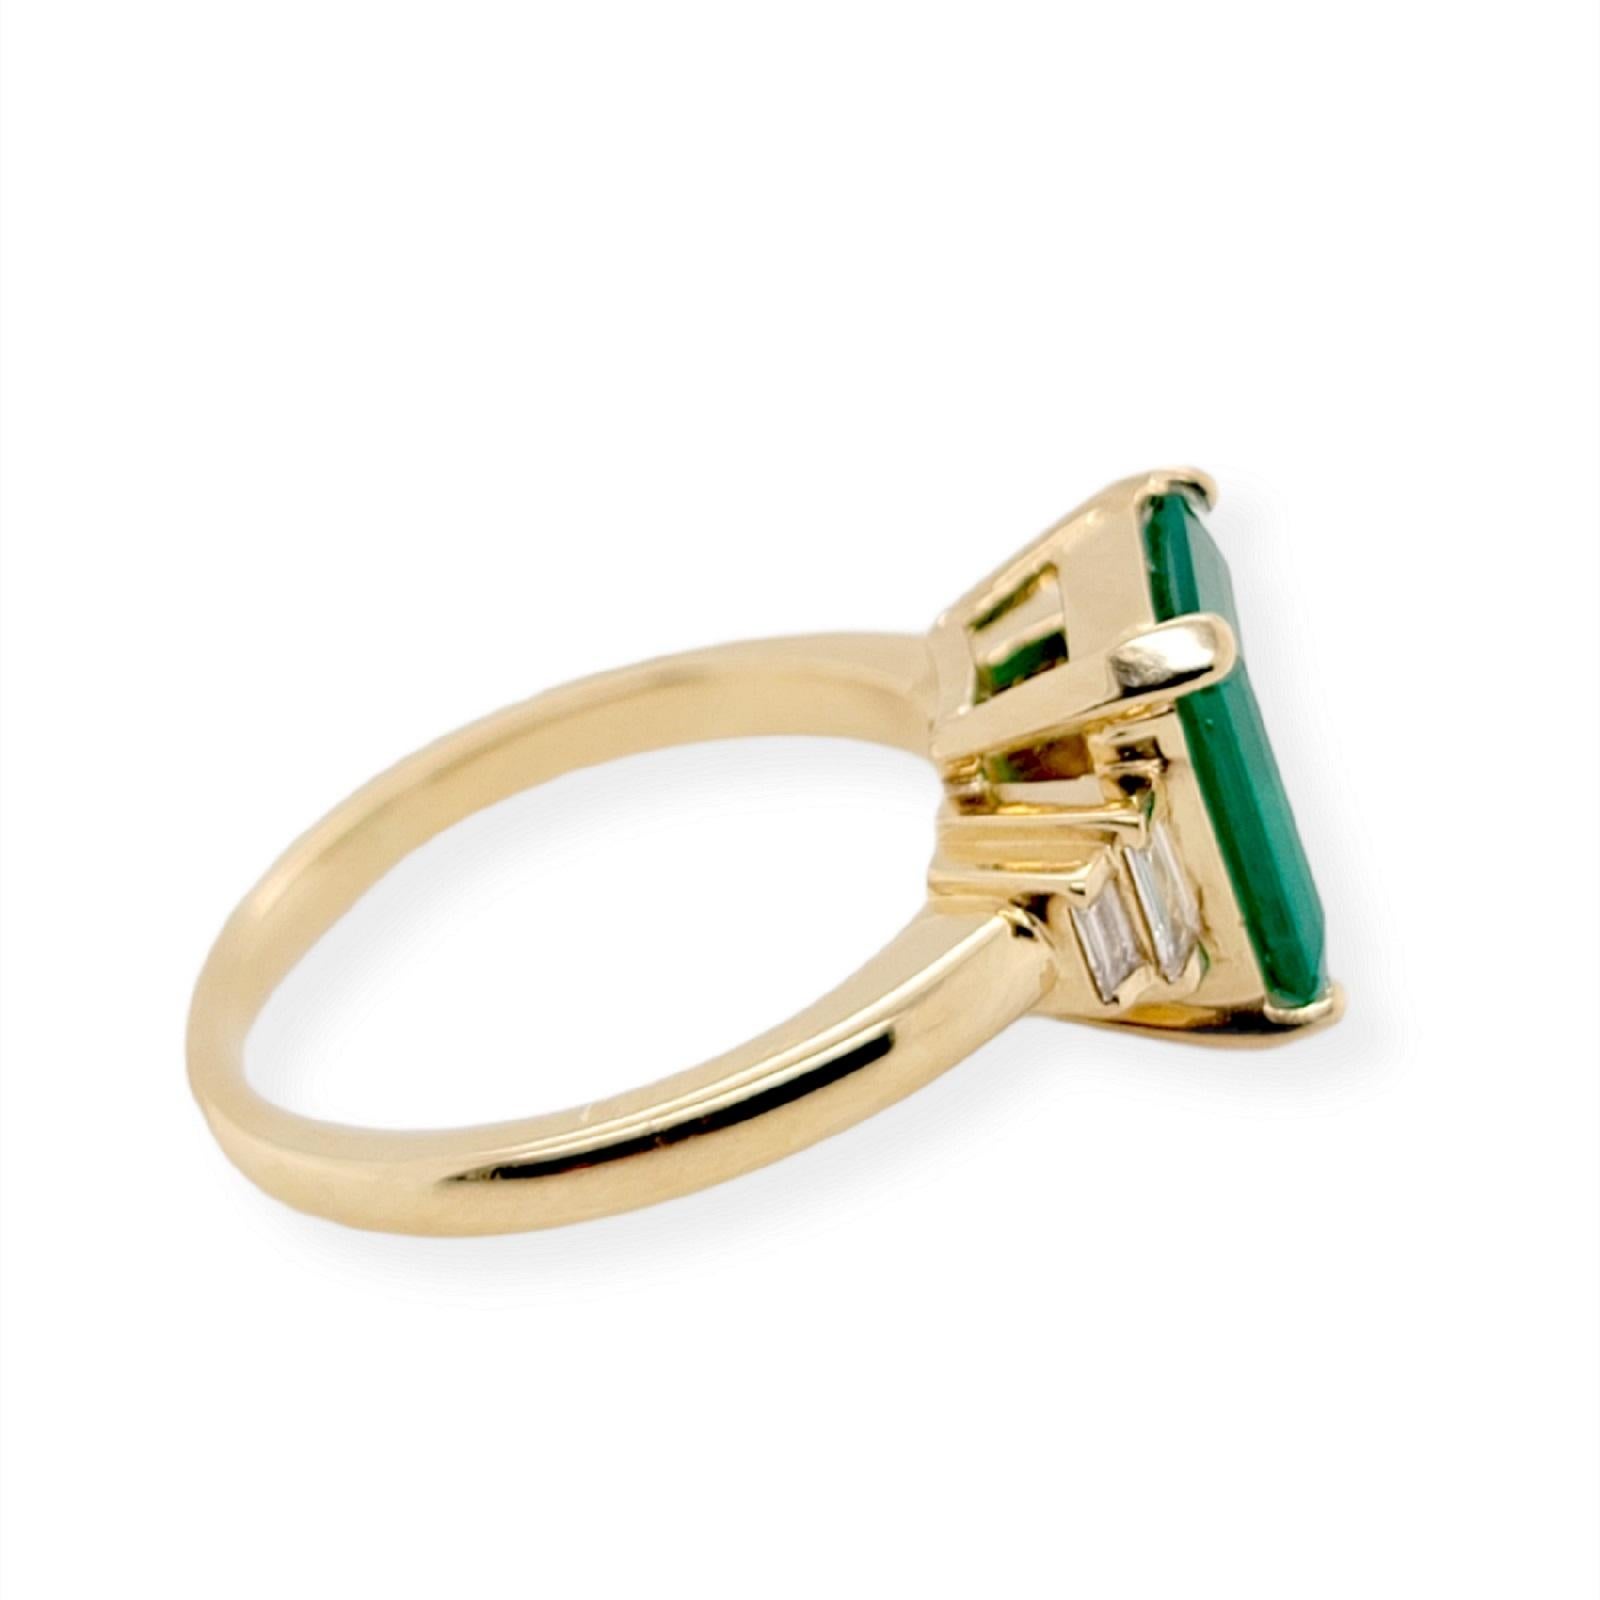 100% Authentic, 100% Customer Satisfaction

Height: 10.8 mm

Width: 18 mm

Size: 6.5 ( Contact Us for Sizing)

Metal:14K Yellow Gold

Hallmarks: 14K

Total Weight: 4.5 Grams

Stone Type: 2.48 CT Zambian Emerald & 0.18 CT Diamonds

Condition: